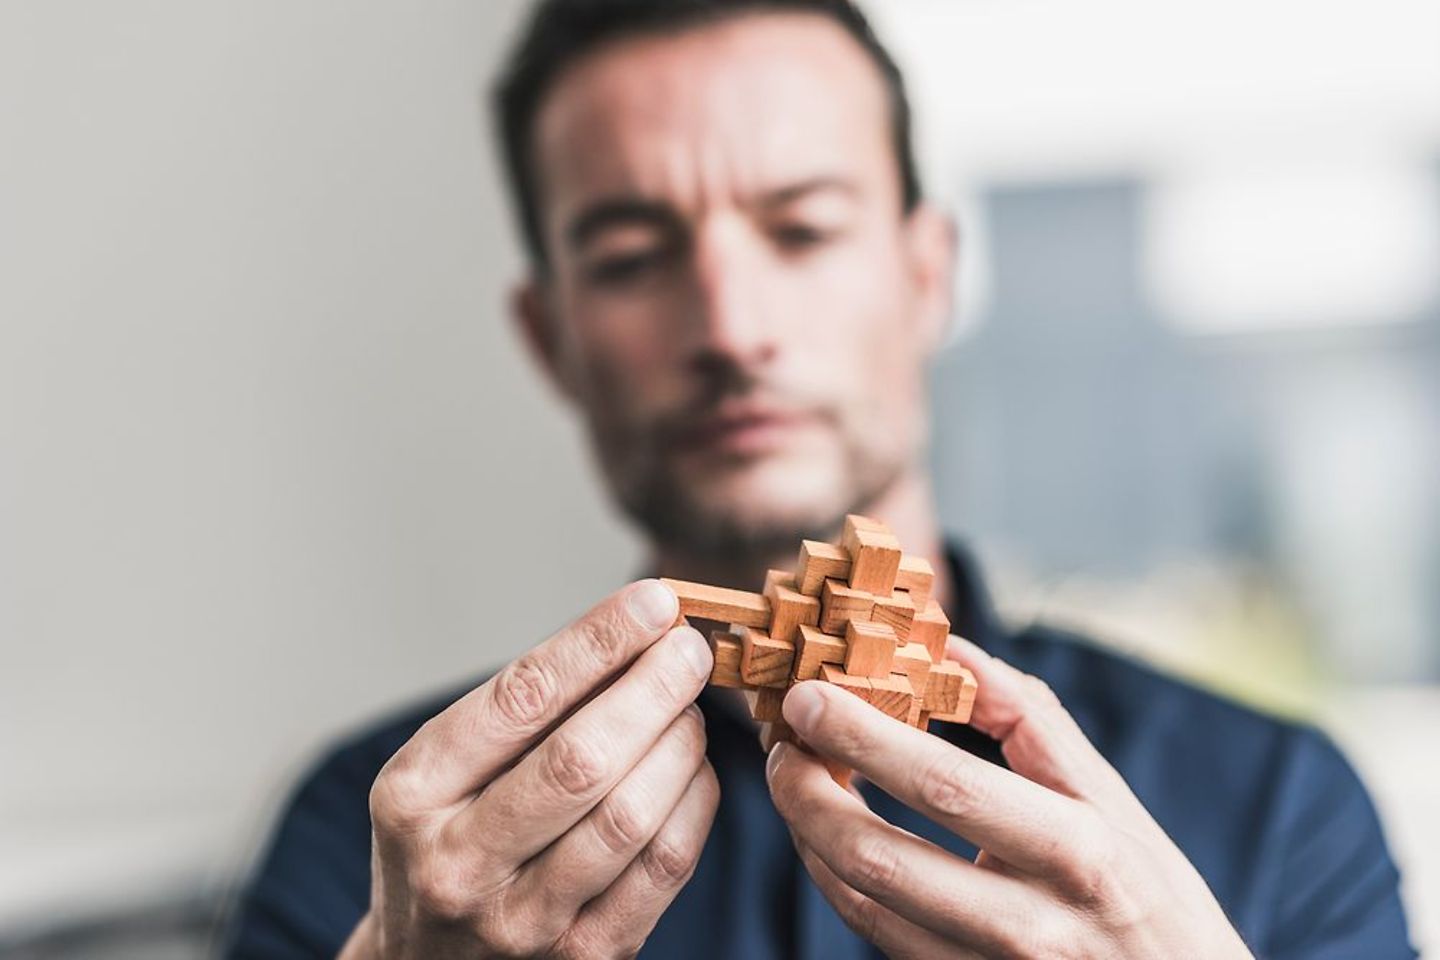  A man assembles a wooden cube – a tricky business, not unlike legally compliant AI